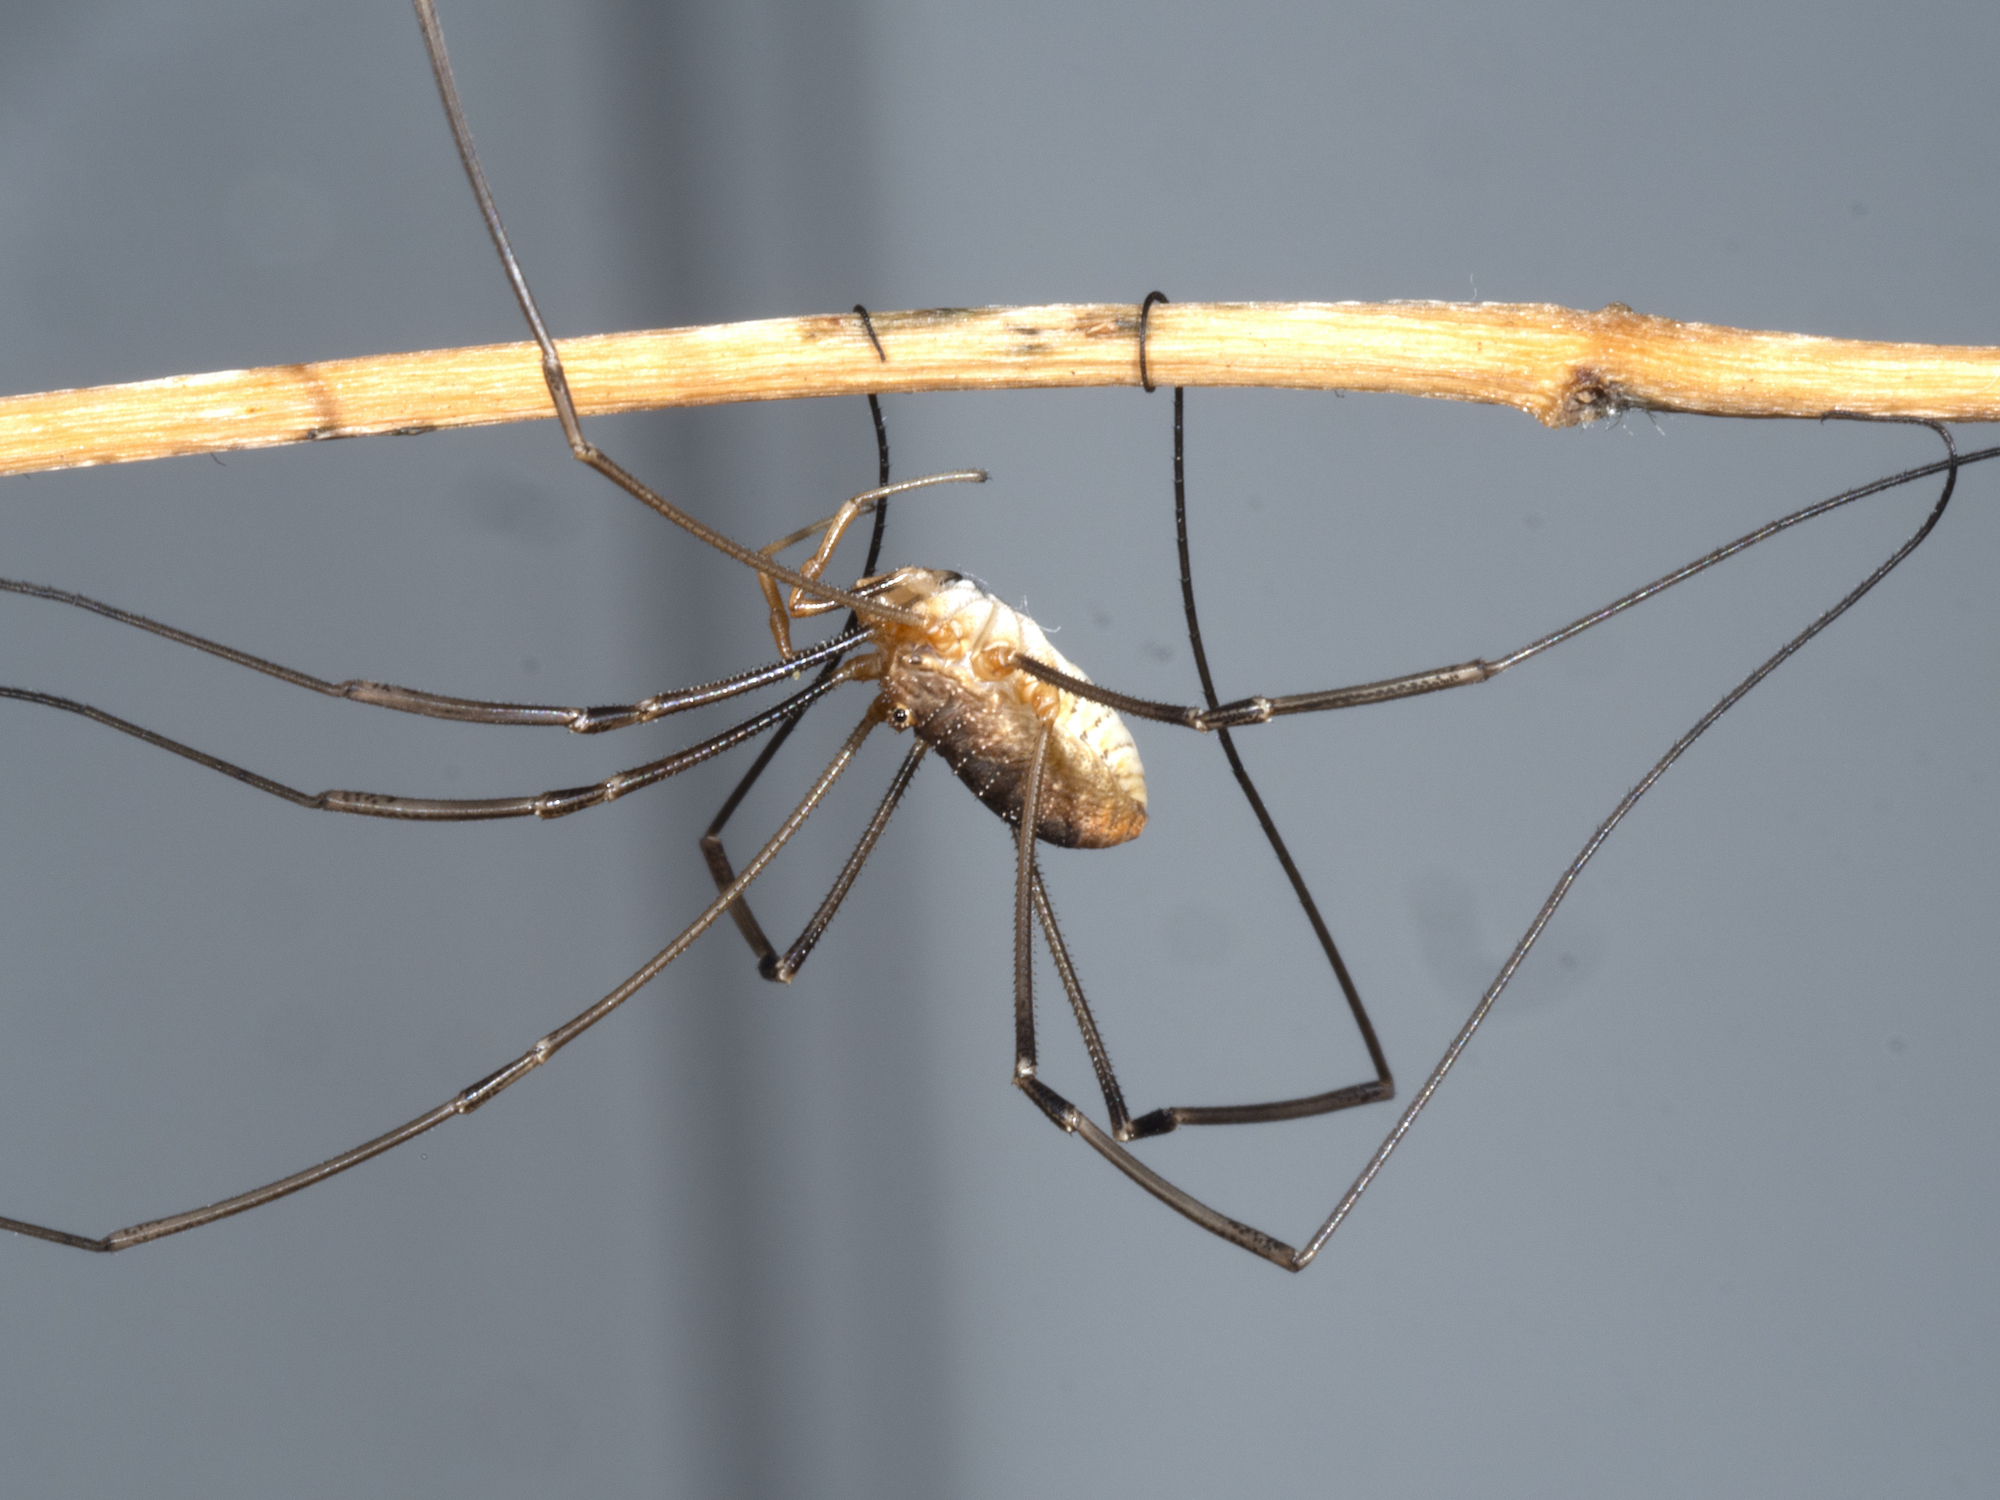 Daddy longlegs got their long legs by reusing some old evolutionary tools